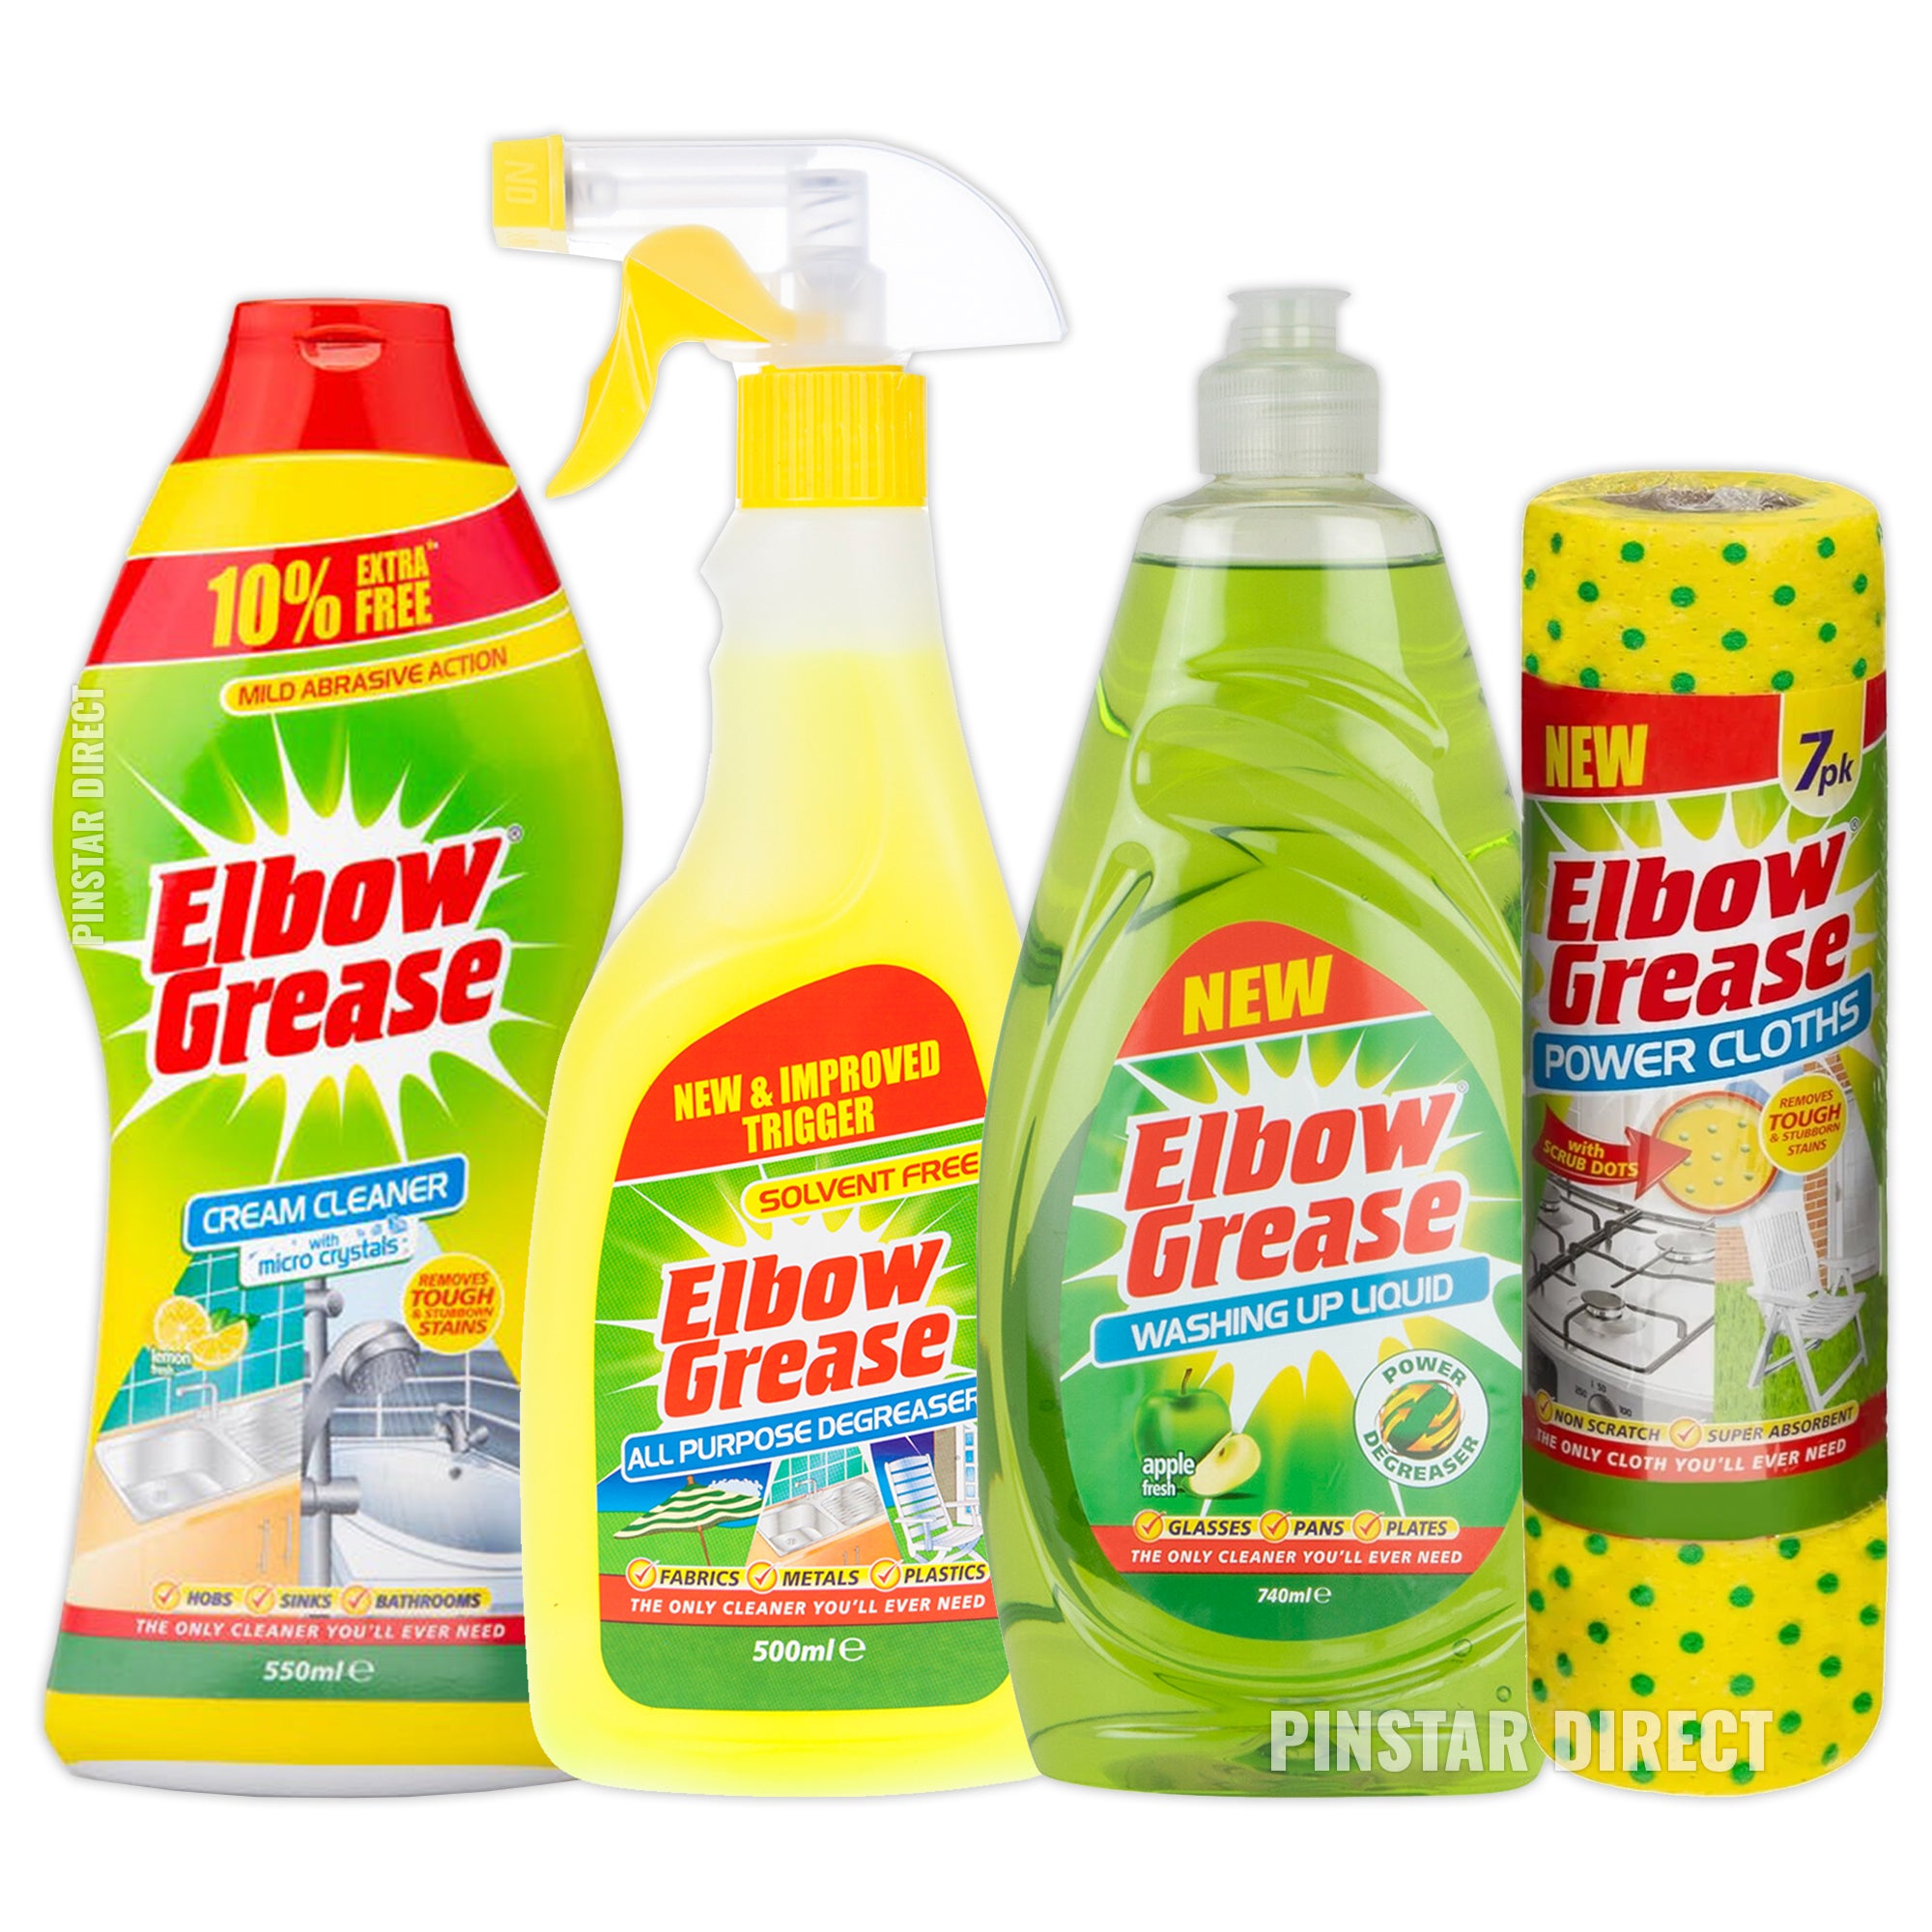 Spare yourself elbow grease when cleaning!!